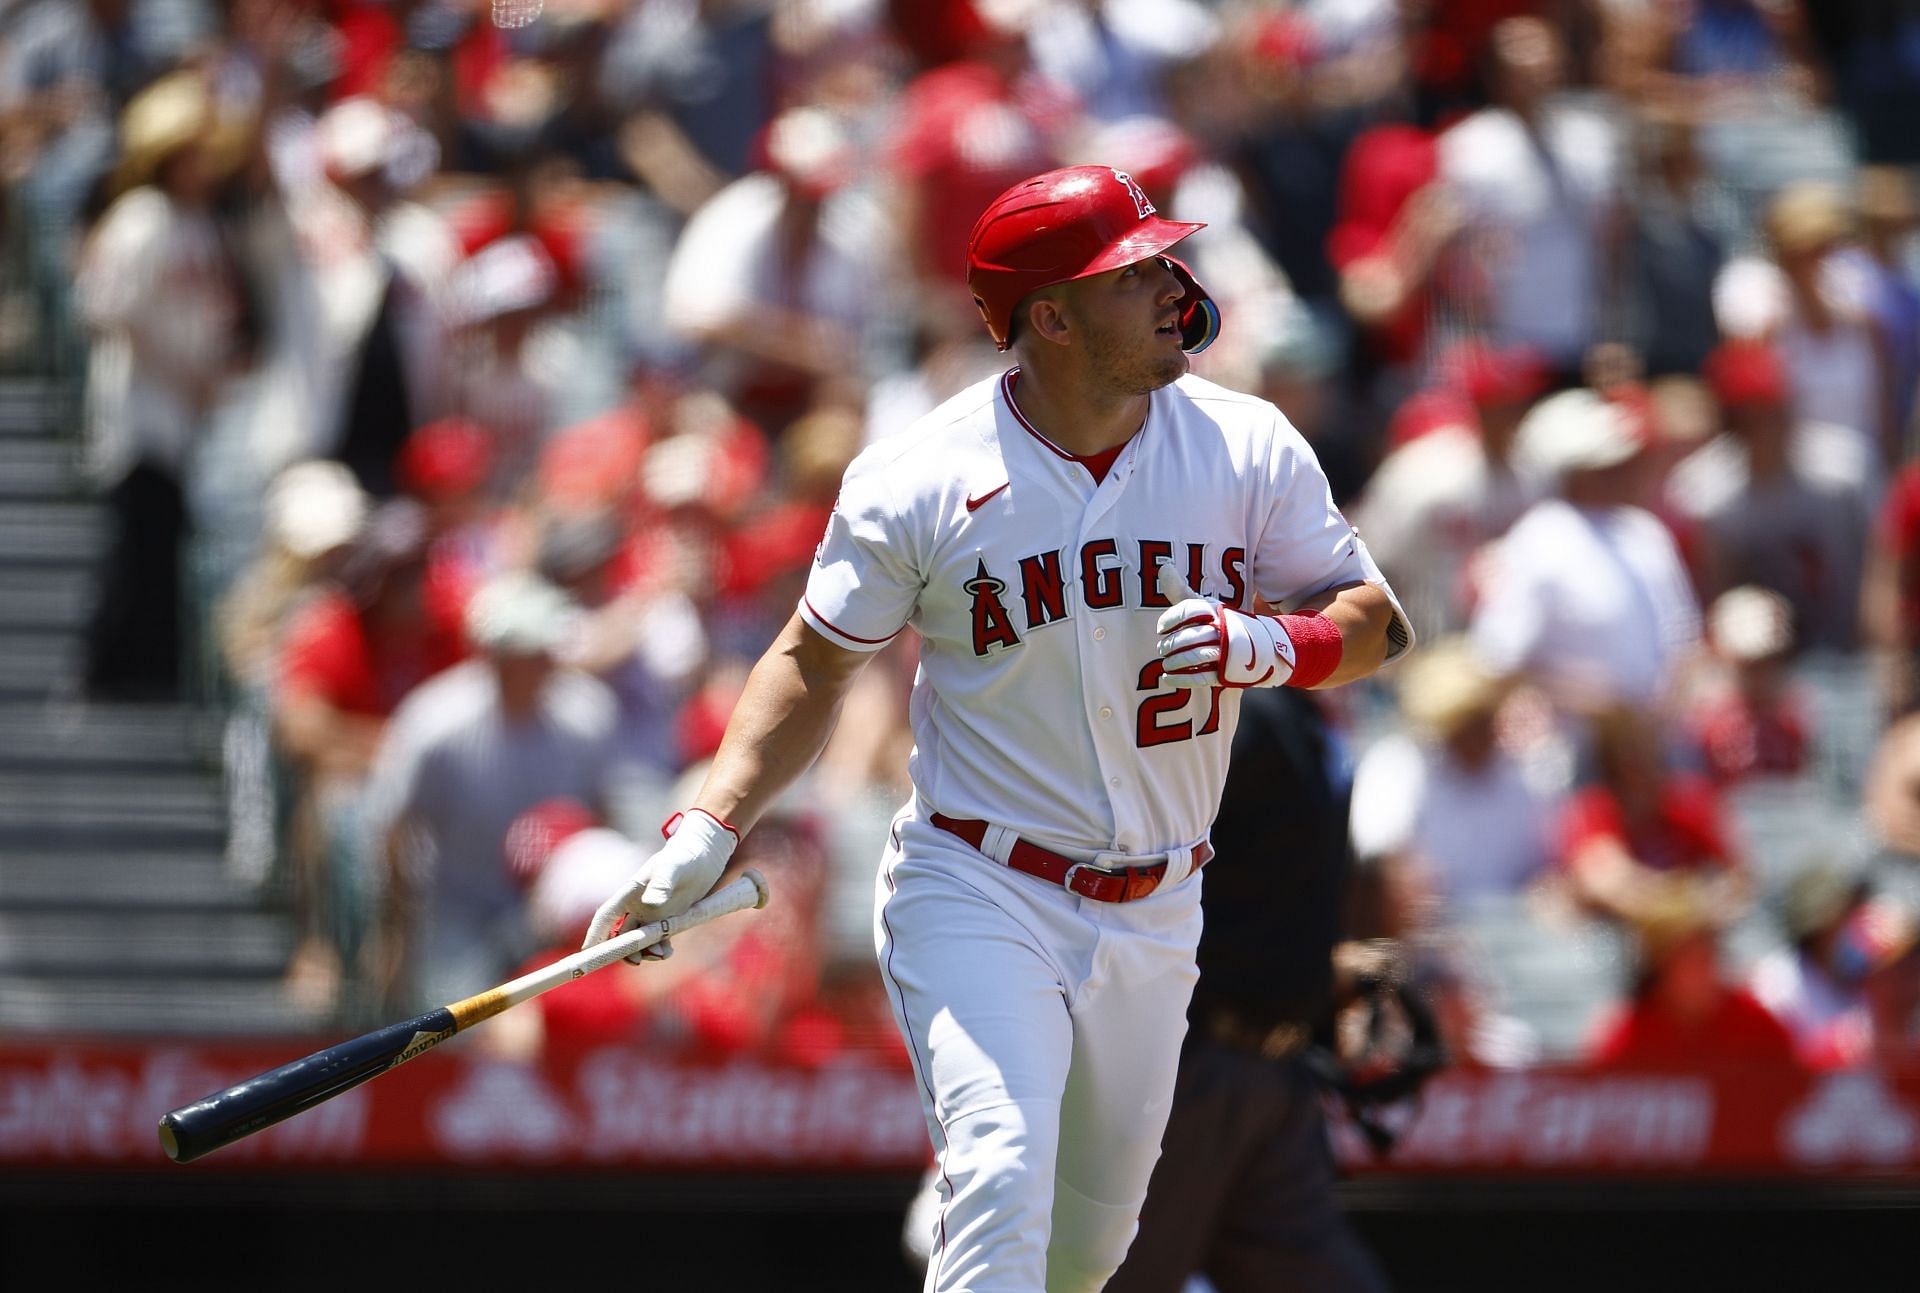 Mike Trout does not want to be traded